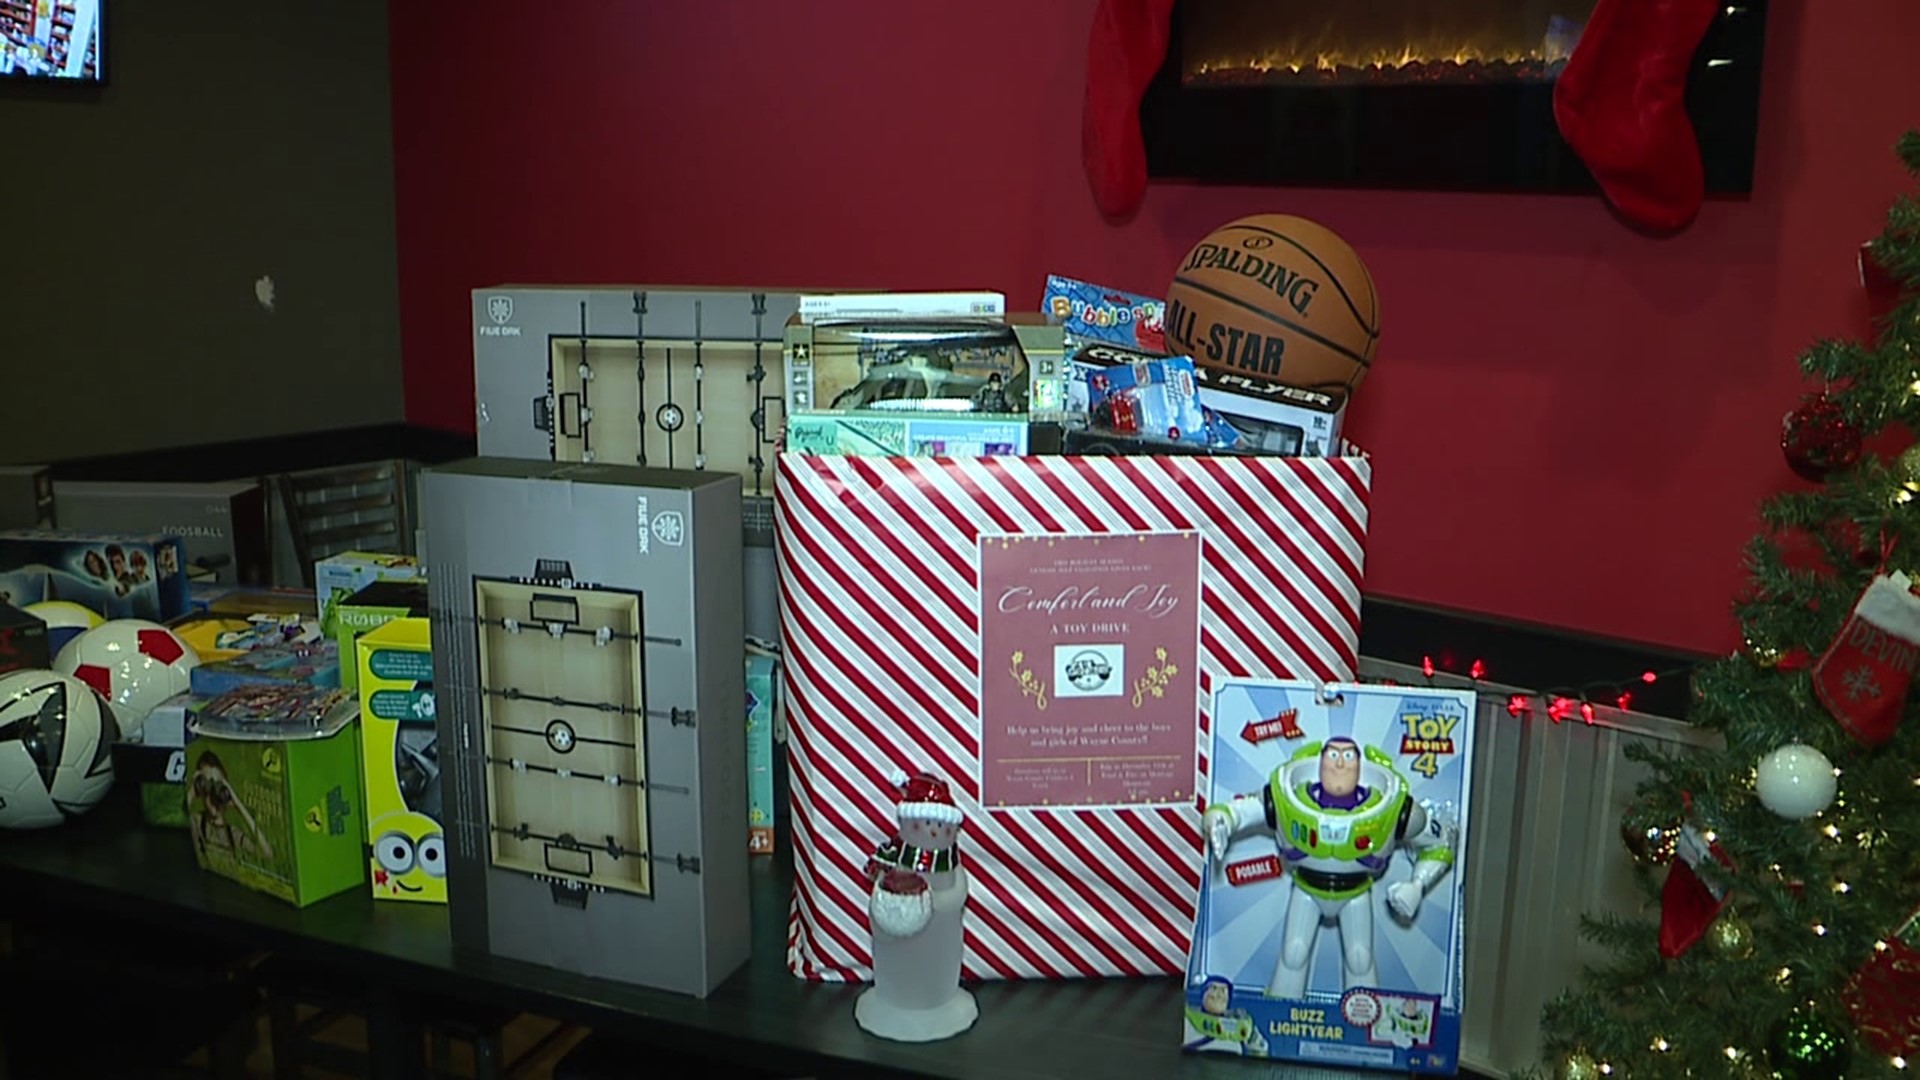 The toy drive took place at Food & Fire Taphouse in Moosic from 3 p.m. to 6 p.m. on Saturday.